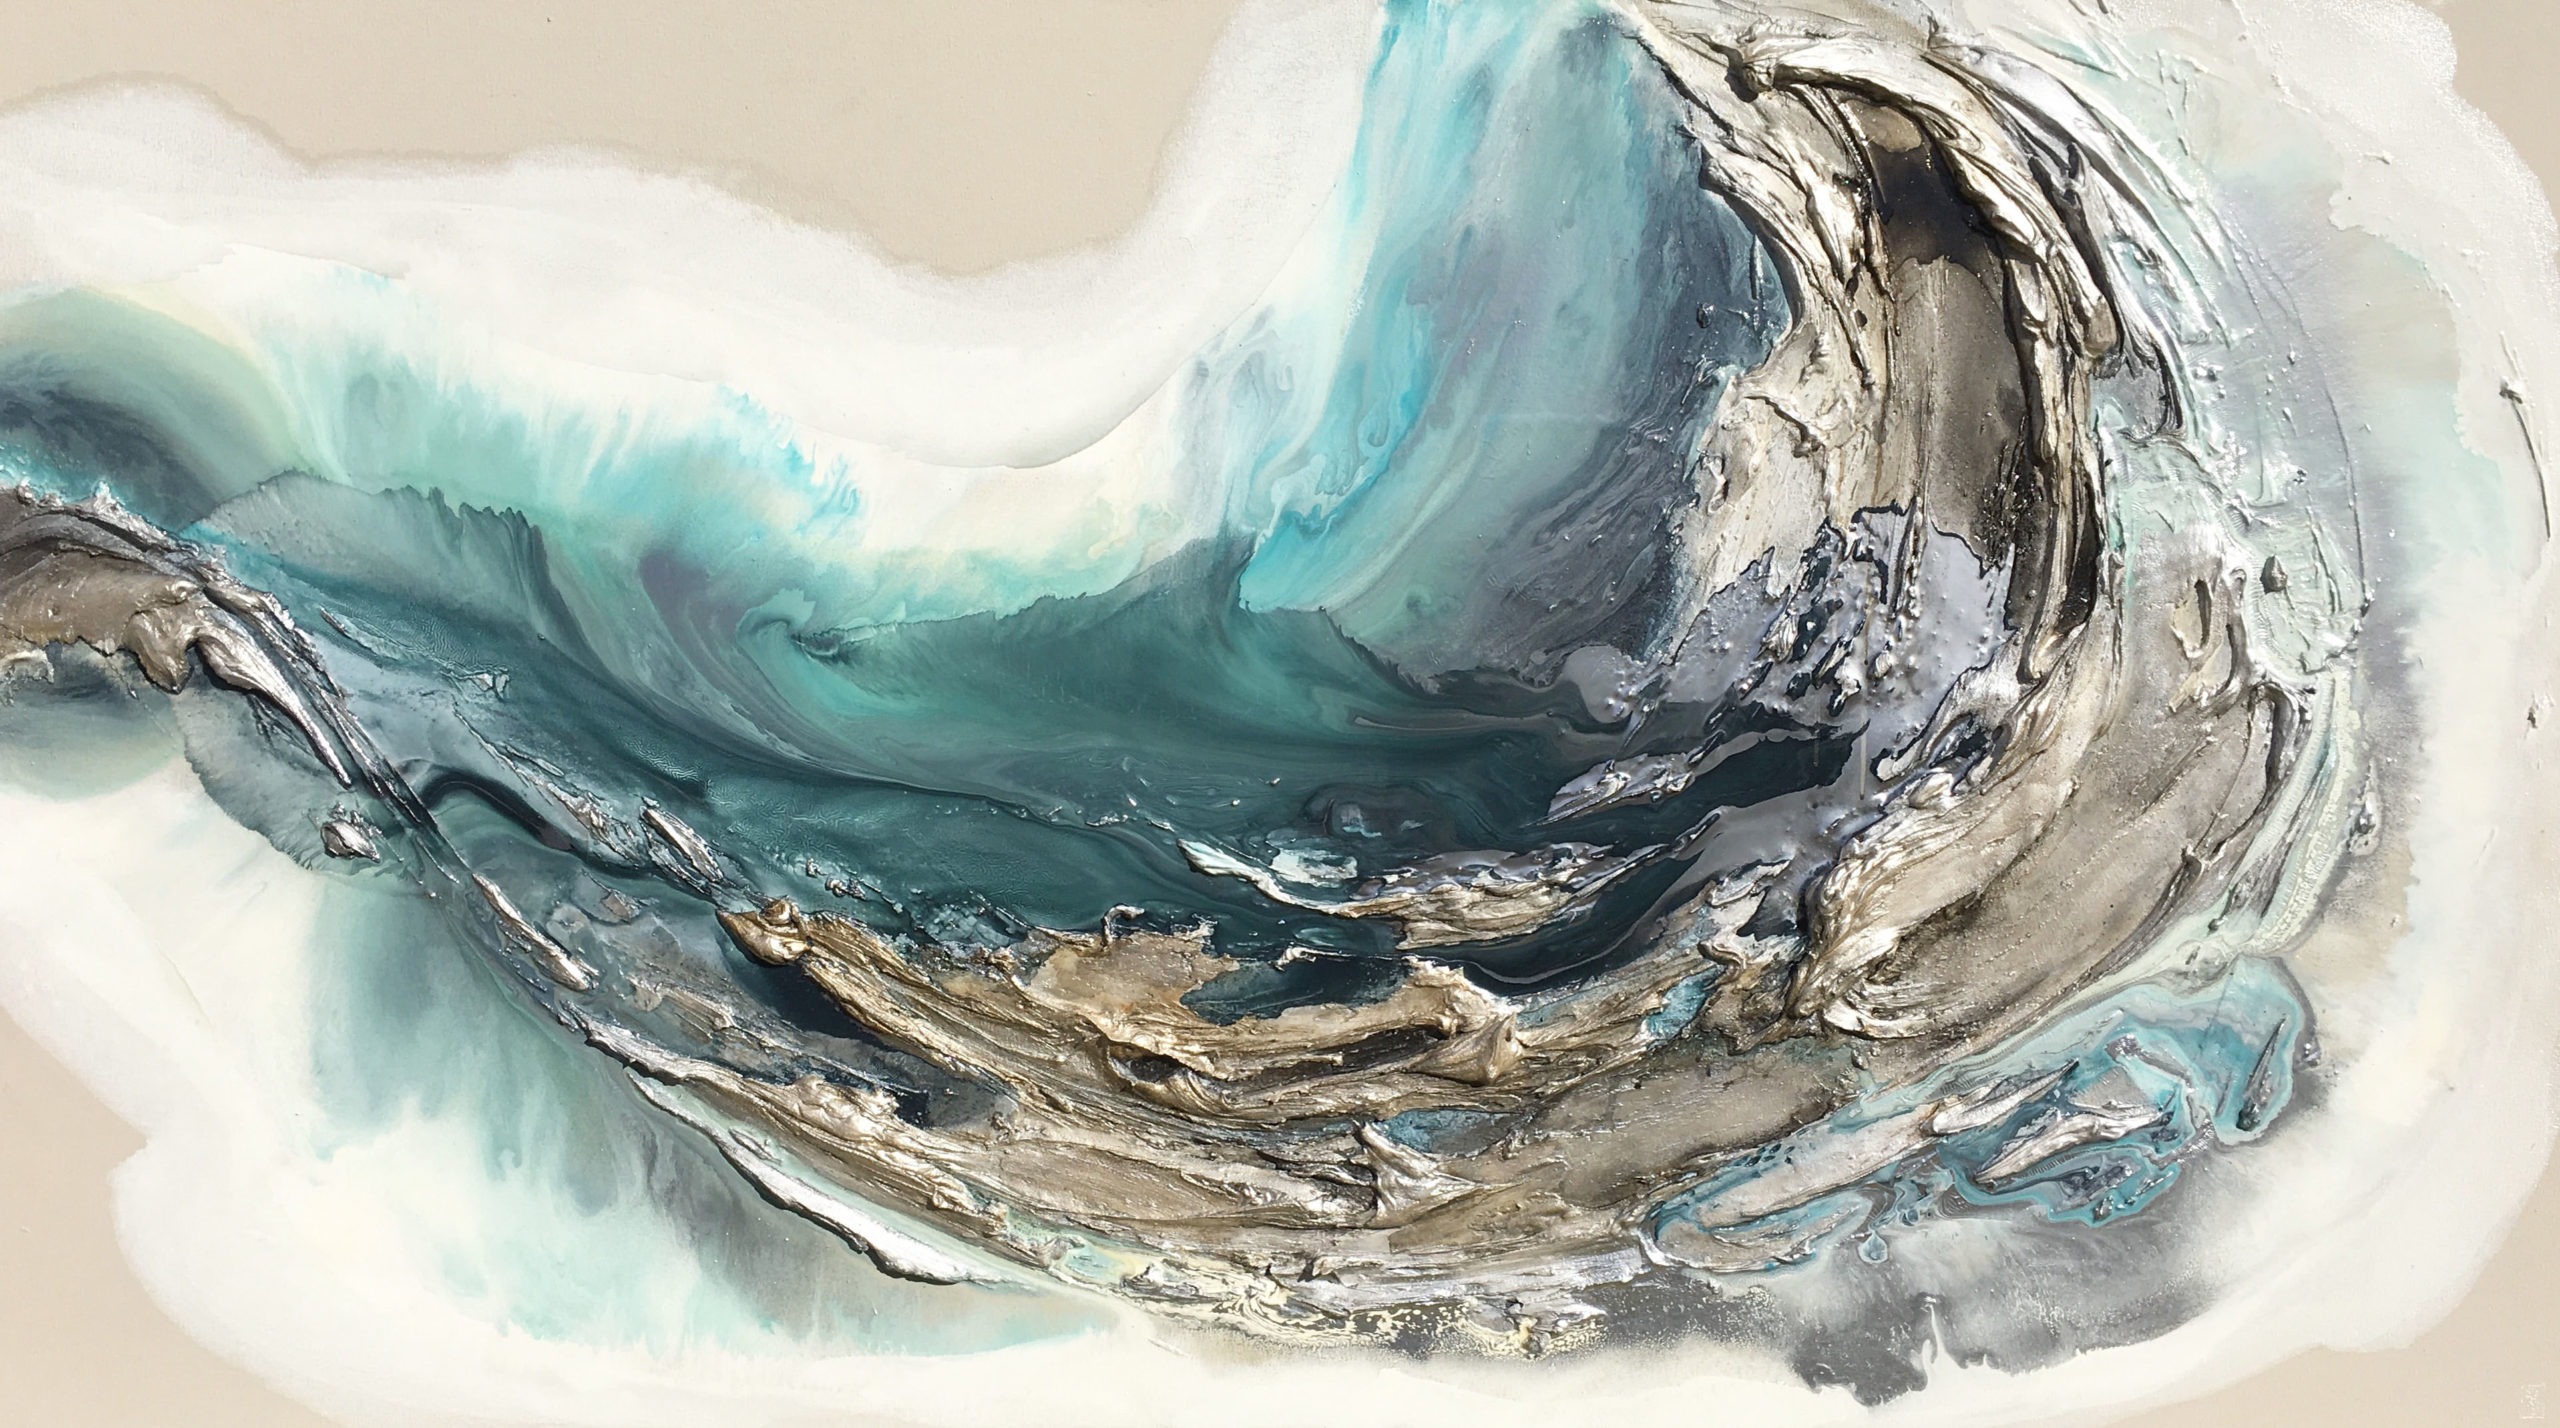 Vicky Sanders Oyster Series - Teal Oyster